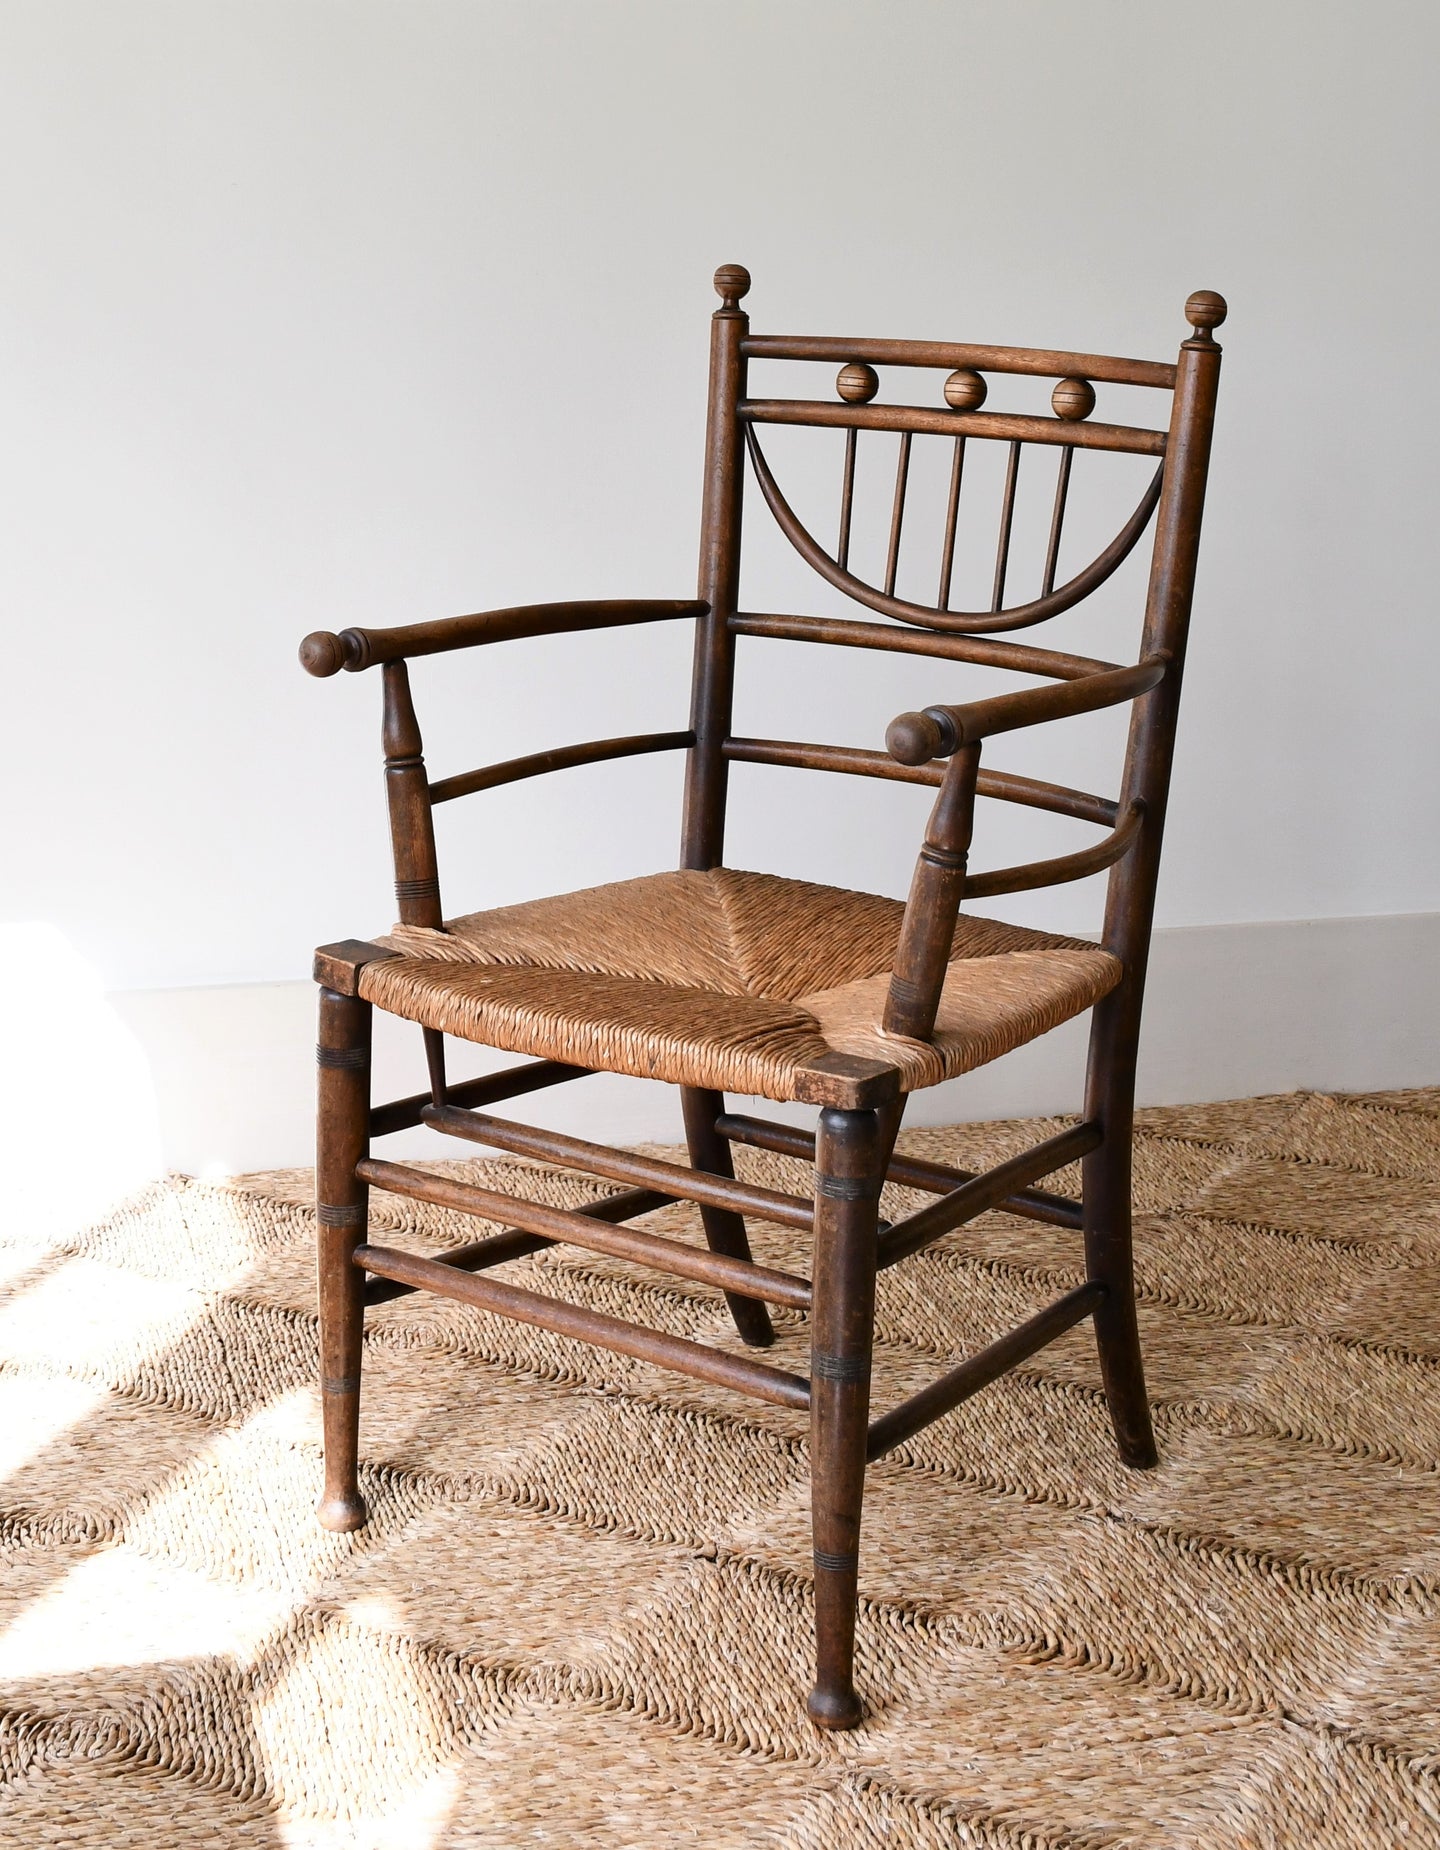 Late 19th Century - Arts & Crafts - Sussex Chair